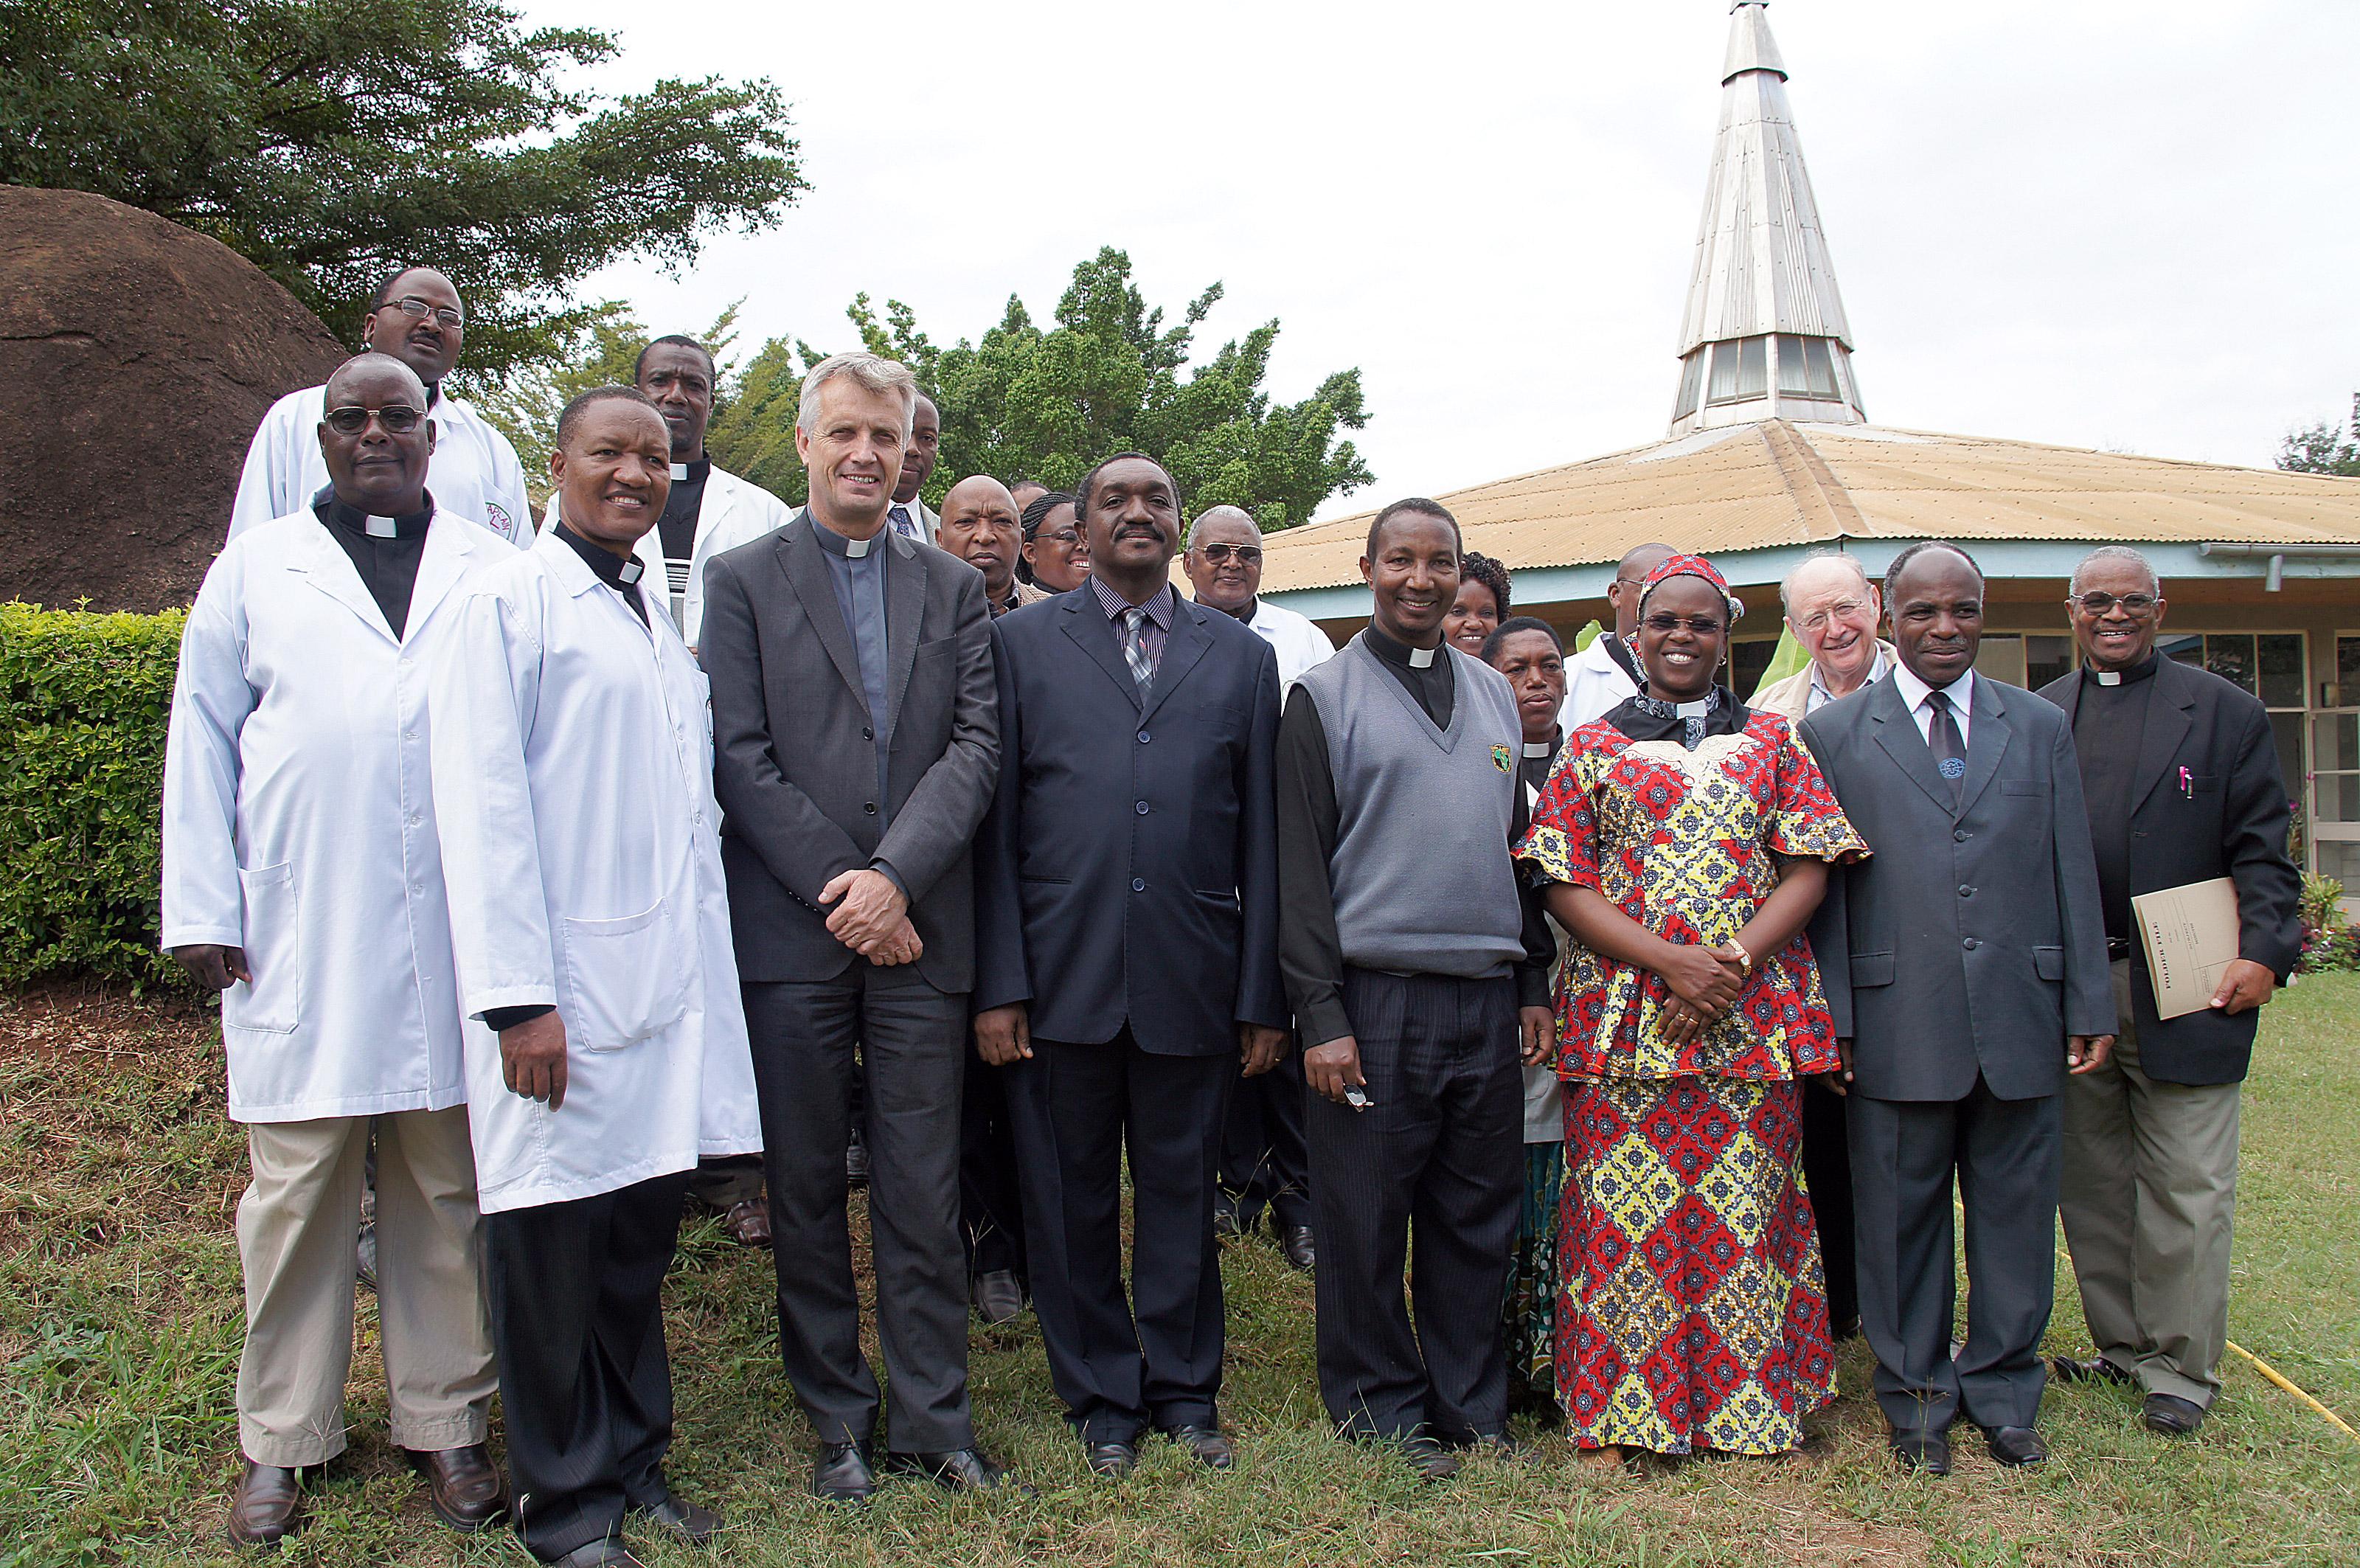 The LWF delegation meets with KCMC staff in Moshi. Â© LWF/H. Martinussen